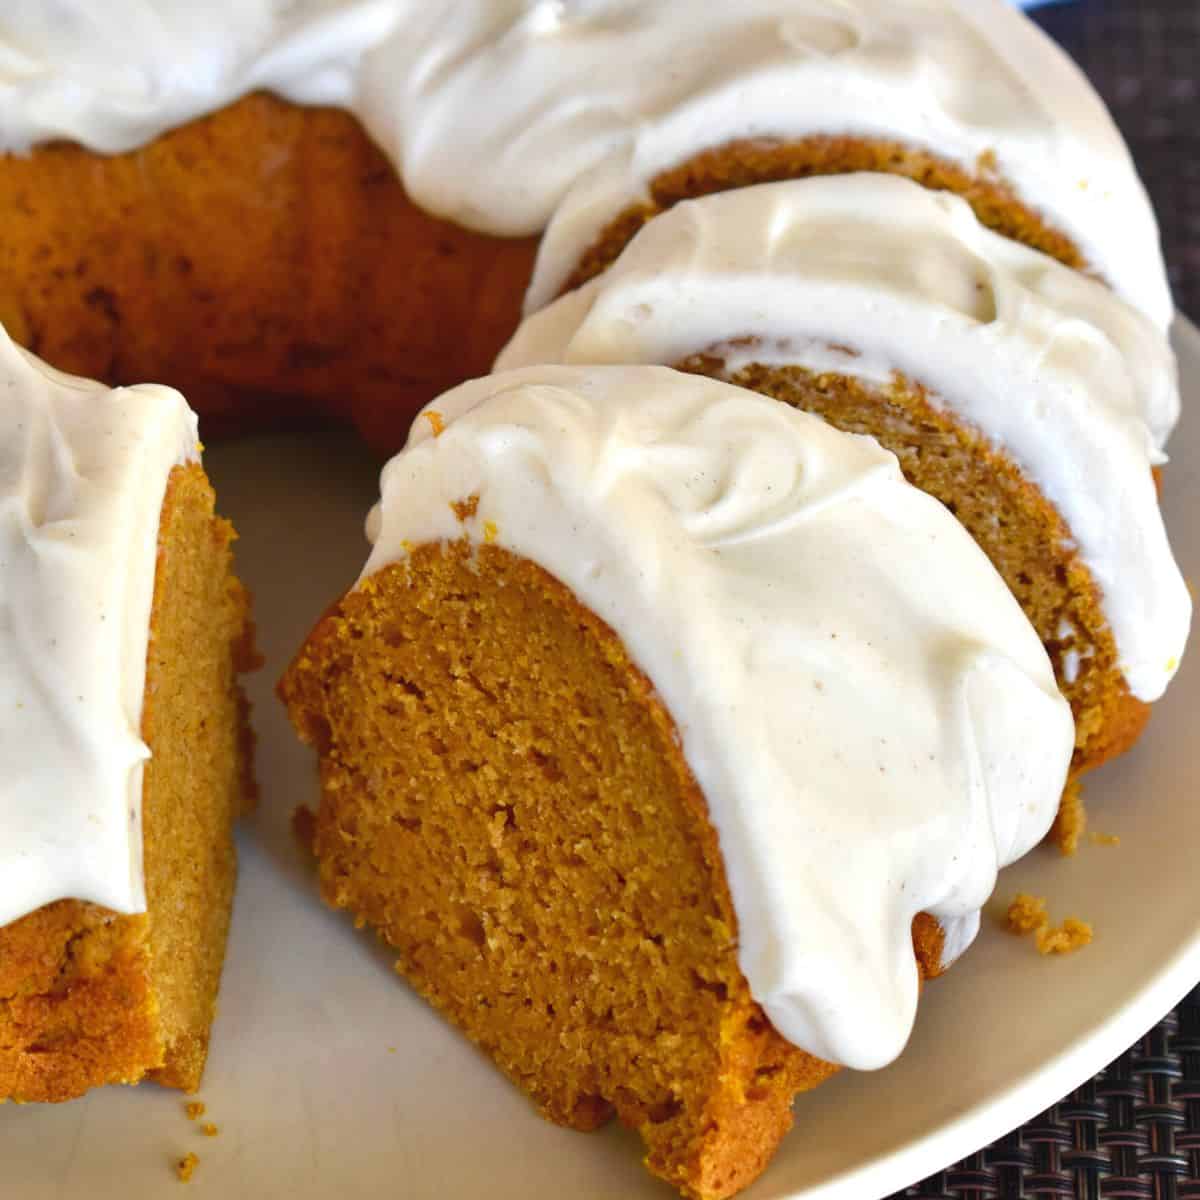 https://thisdelicioushouse.com/wp-content/uploads/2022/09/pumpkin-bundt-cake-with-cream-cheese-frosting-2.jpg